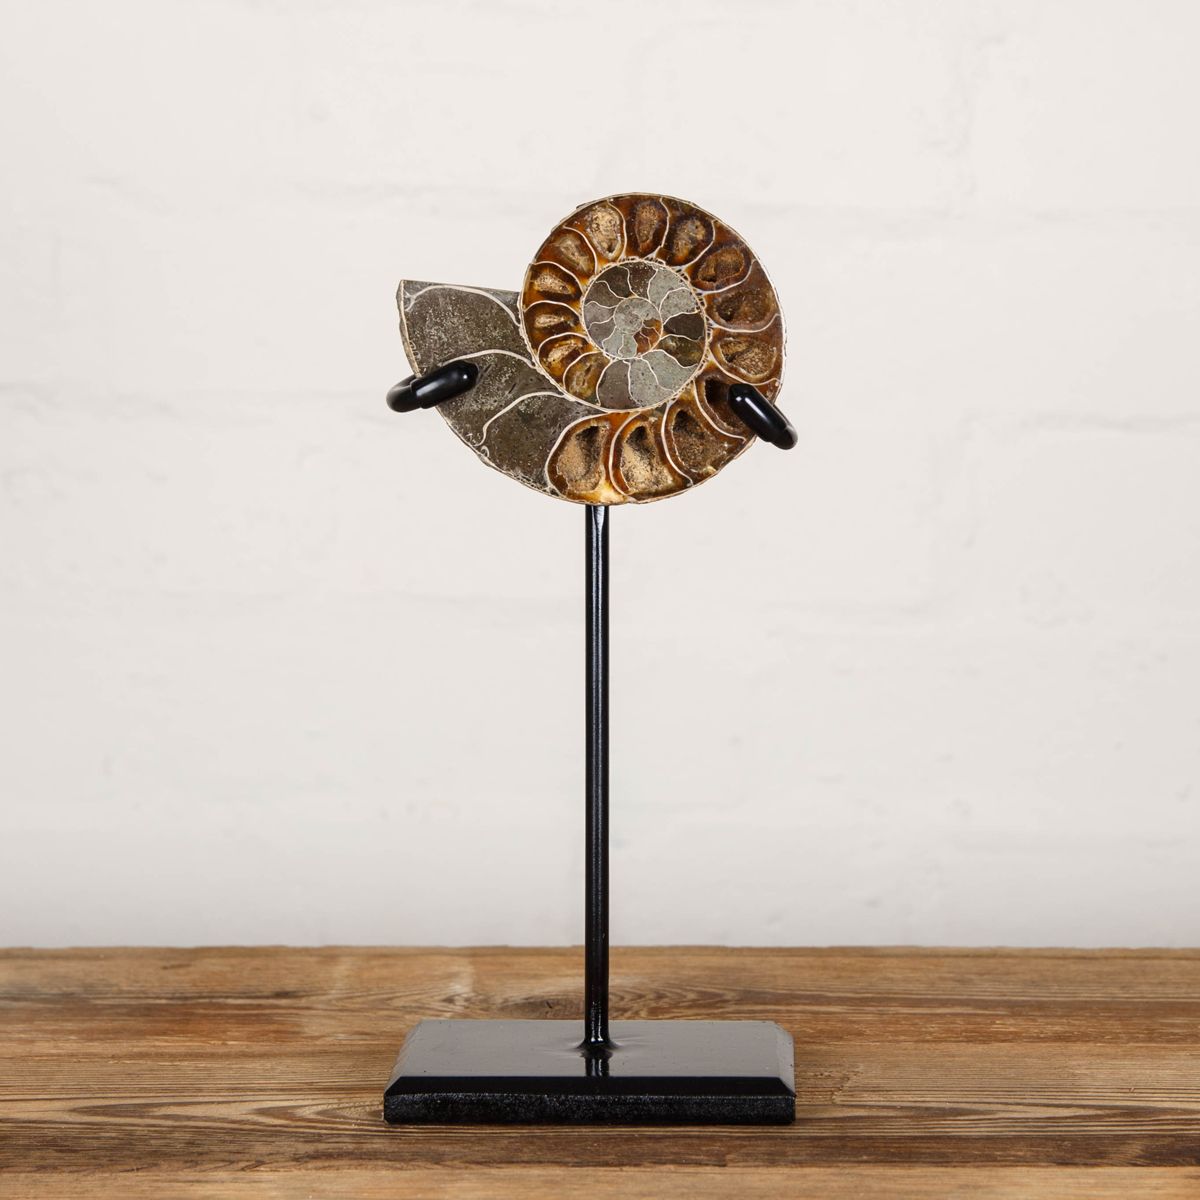 Minibeast 3.6 inch Polished & Sliced Ammonite Fossil on Stand (Cleoniceras sp)